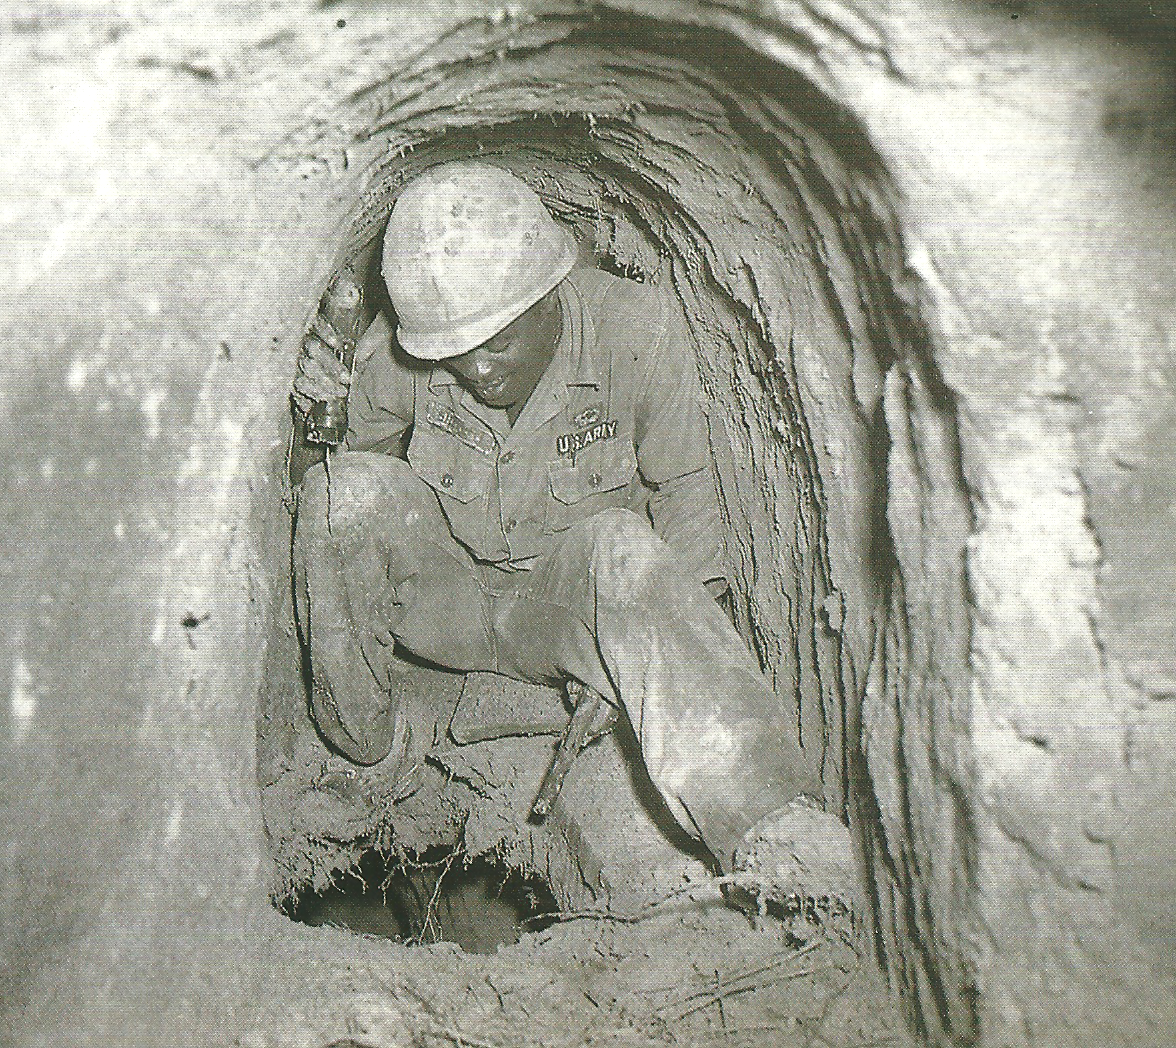 Man in uniform huddled in a tunnel over a hole in the ground holding a flashlight in his left hand and a pistol in his right hand, both pointed at the hole.